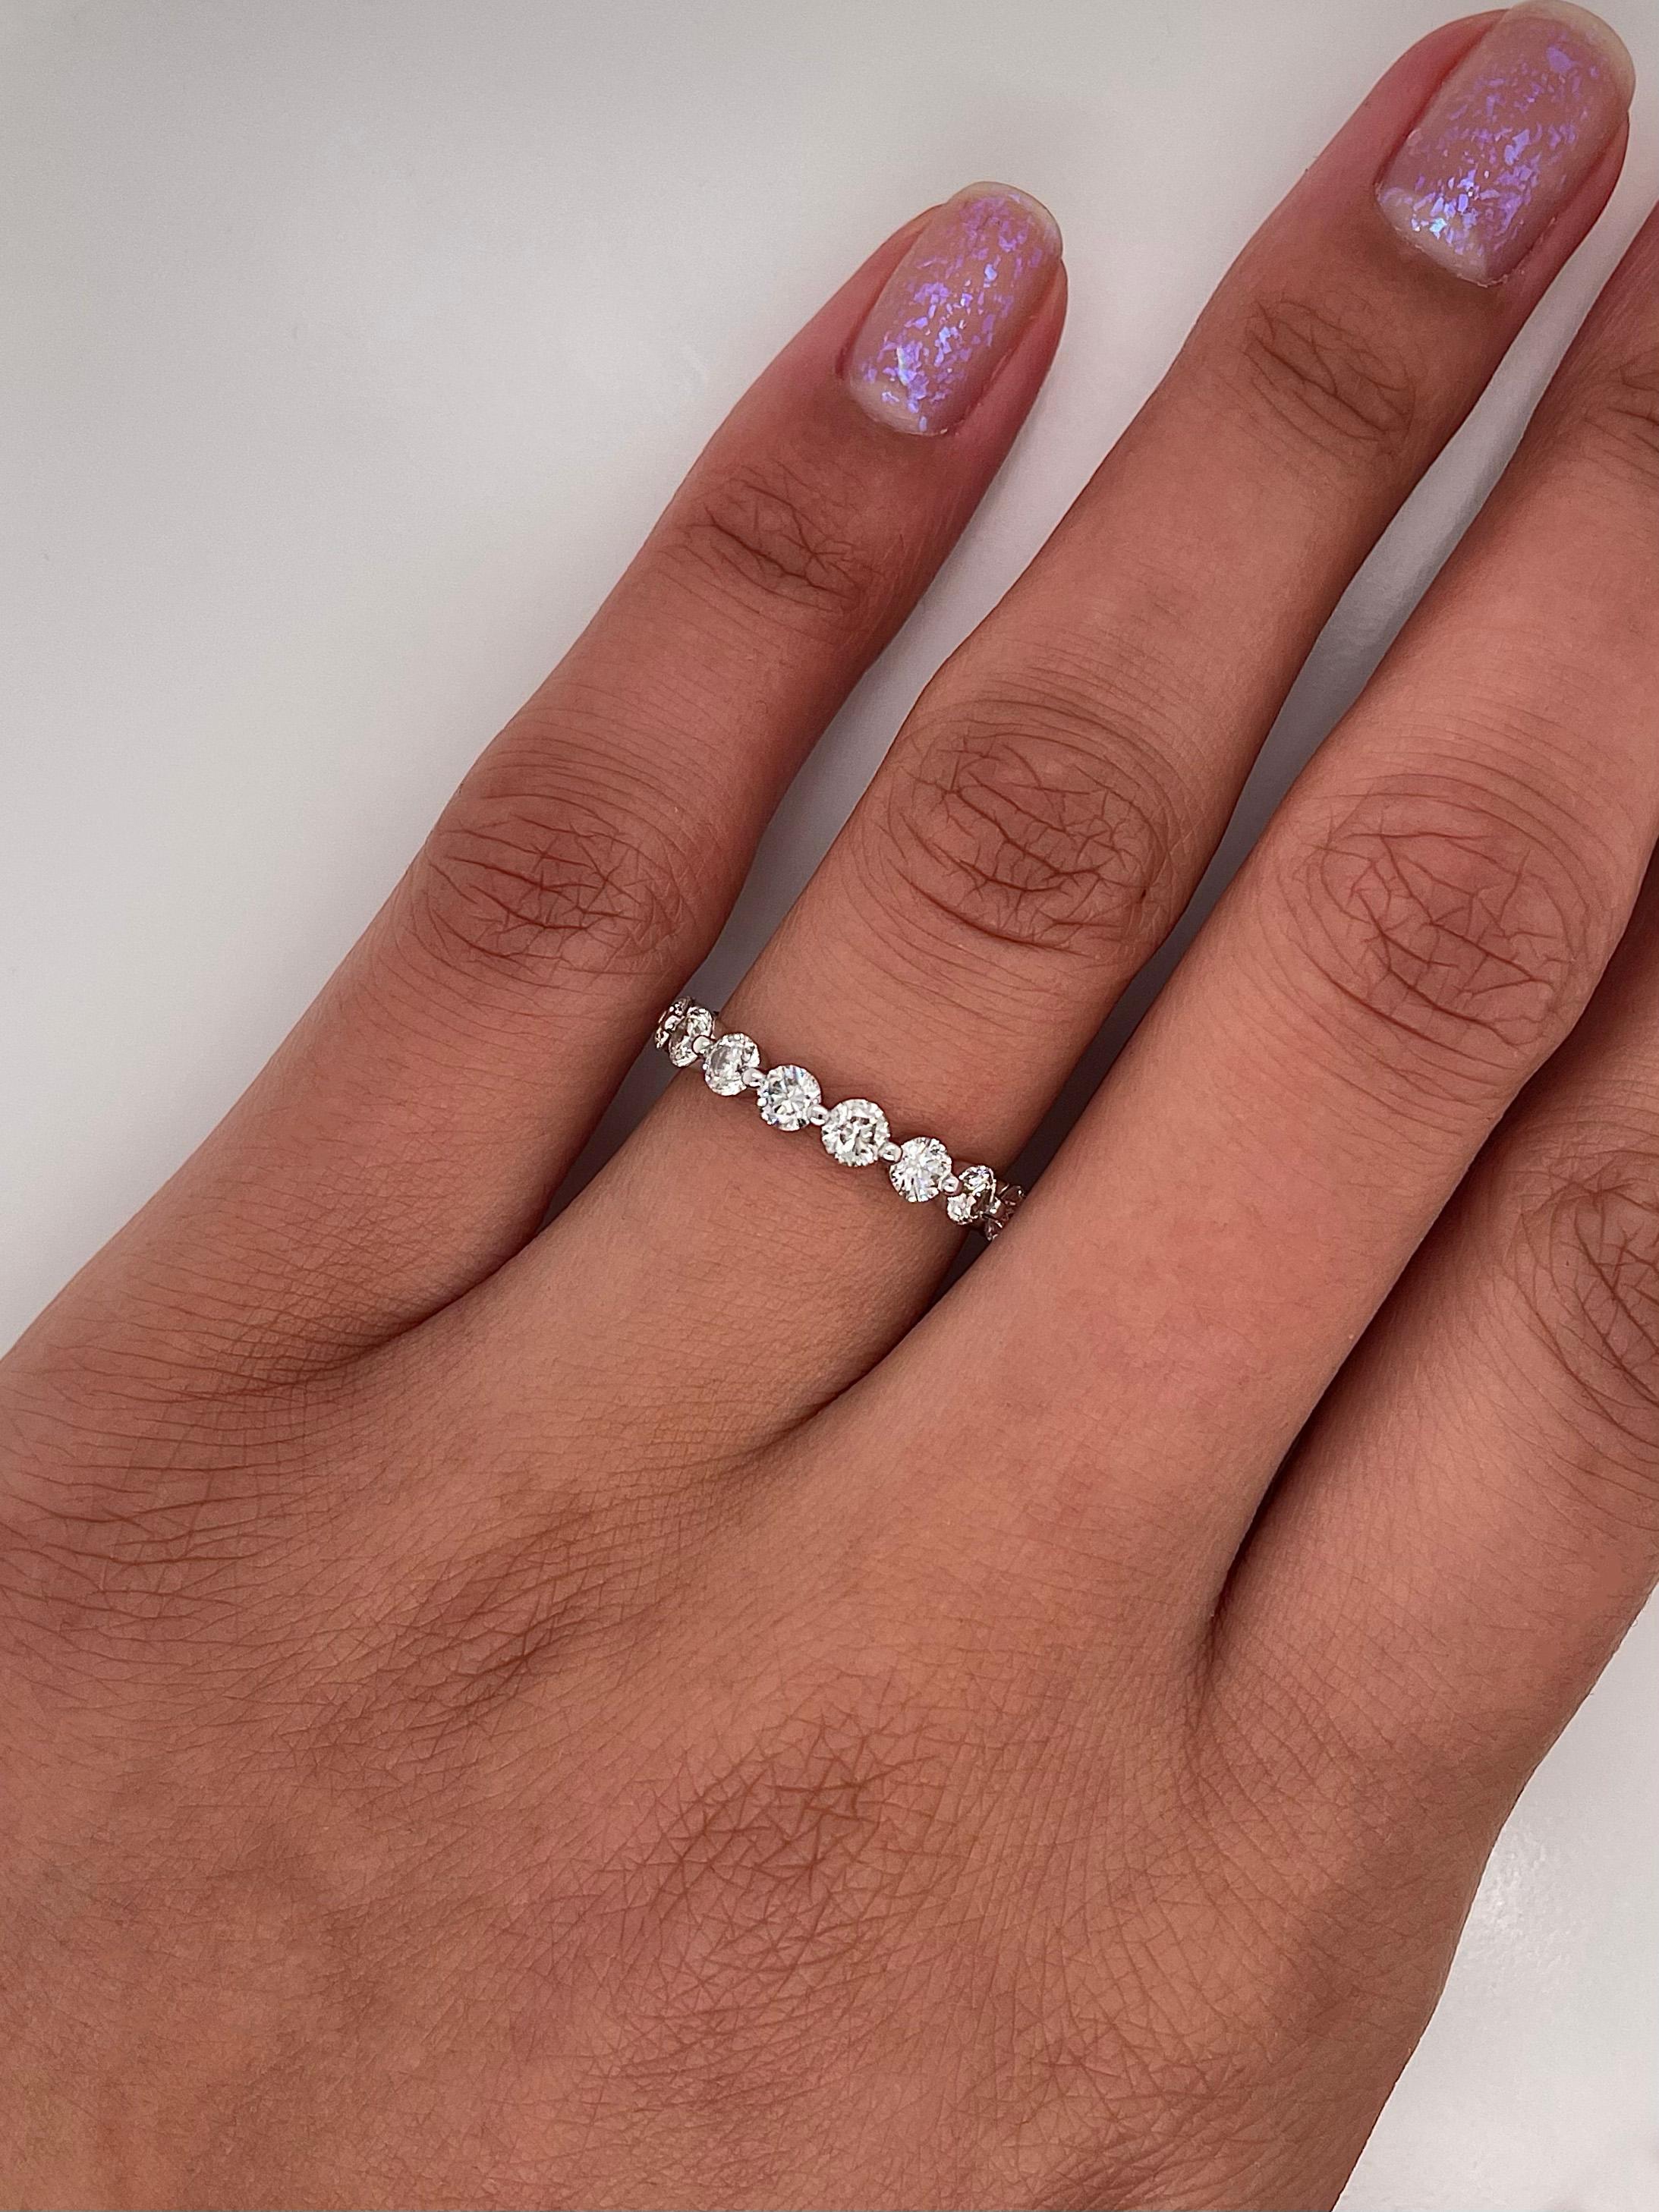 Brilliant Cut 1.90 Carat Shared Prong Diamond Eternity Band in 14K White Gold For Sale